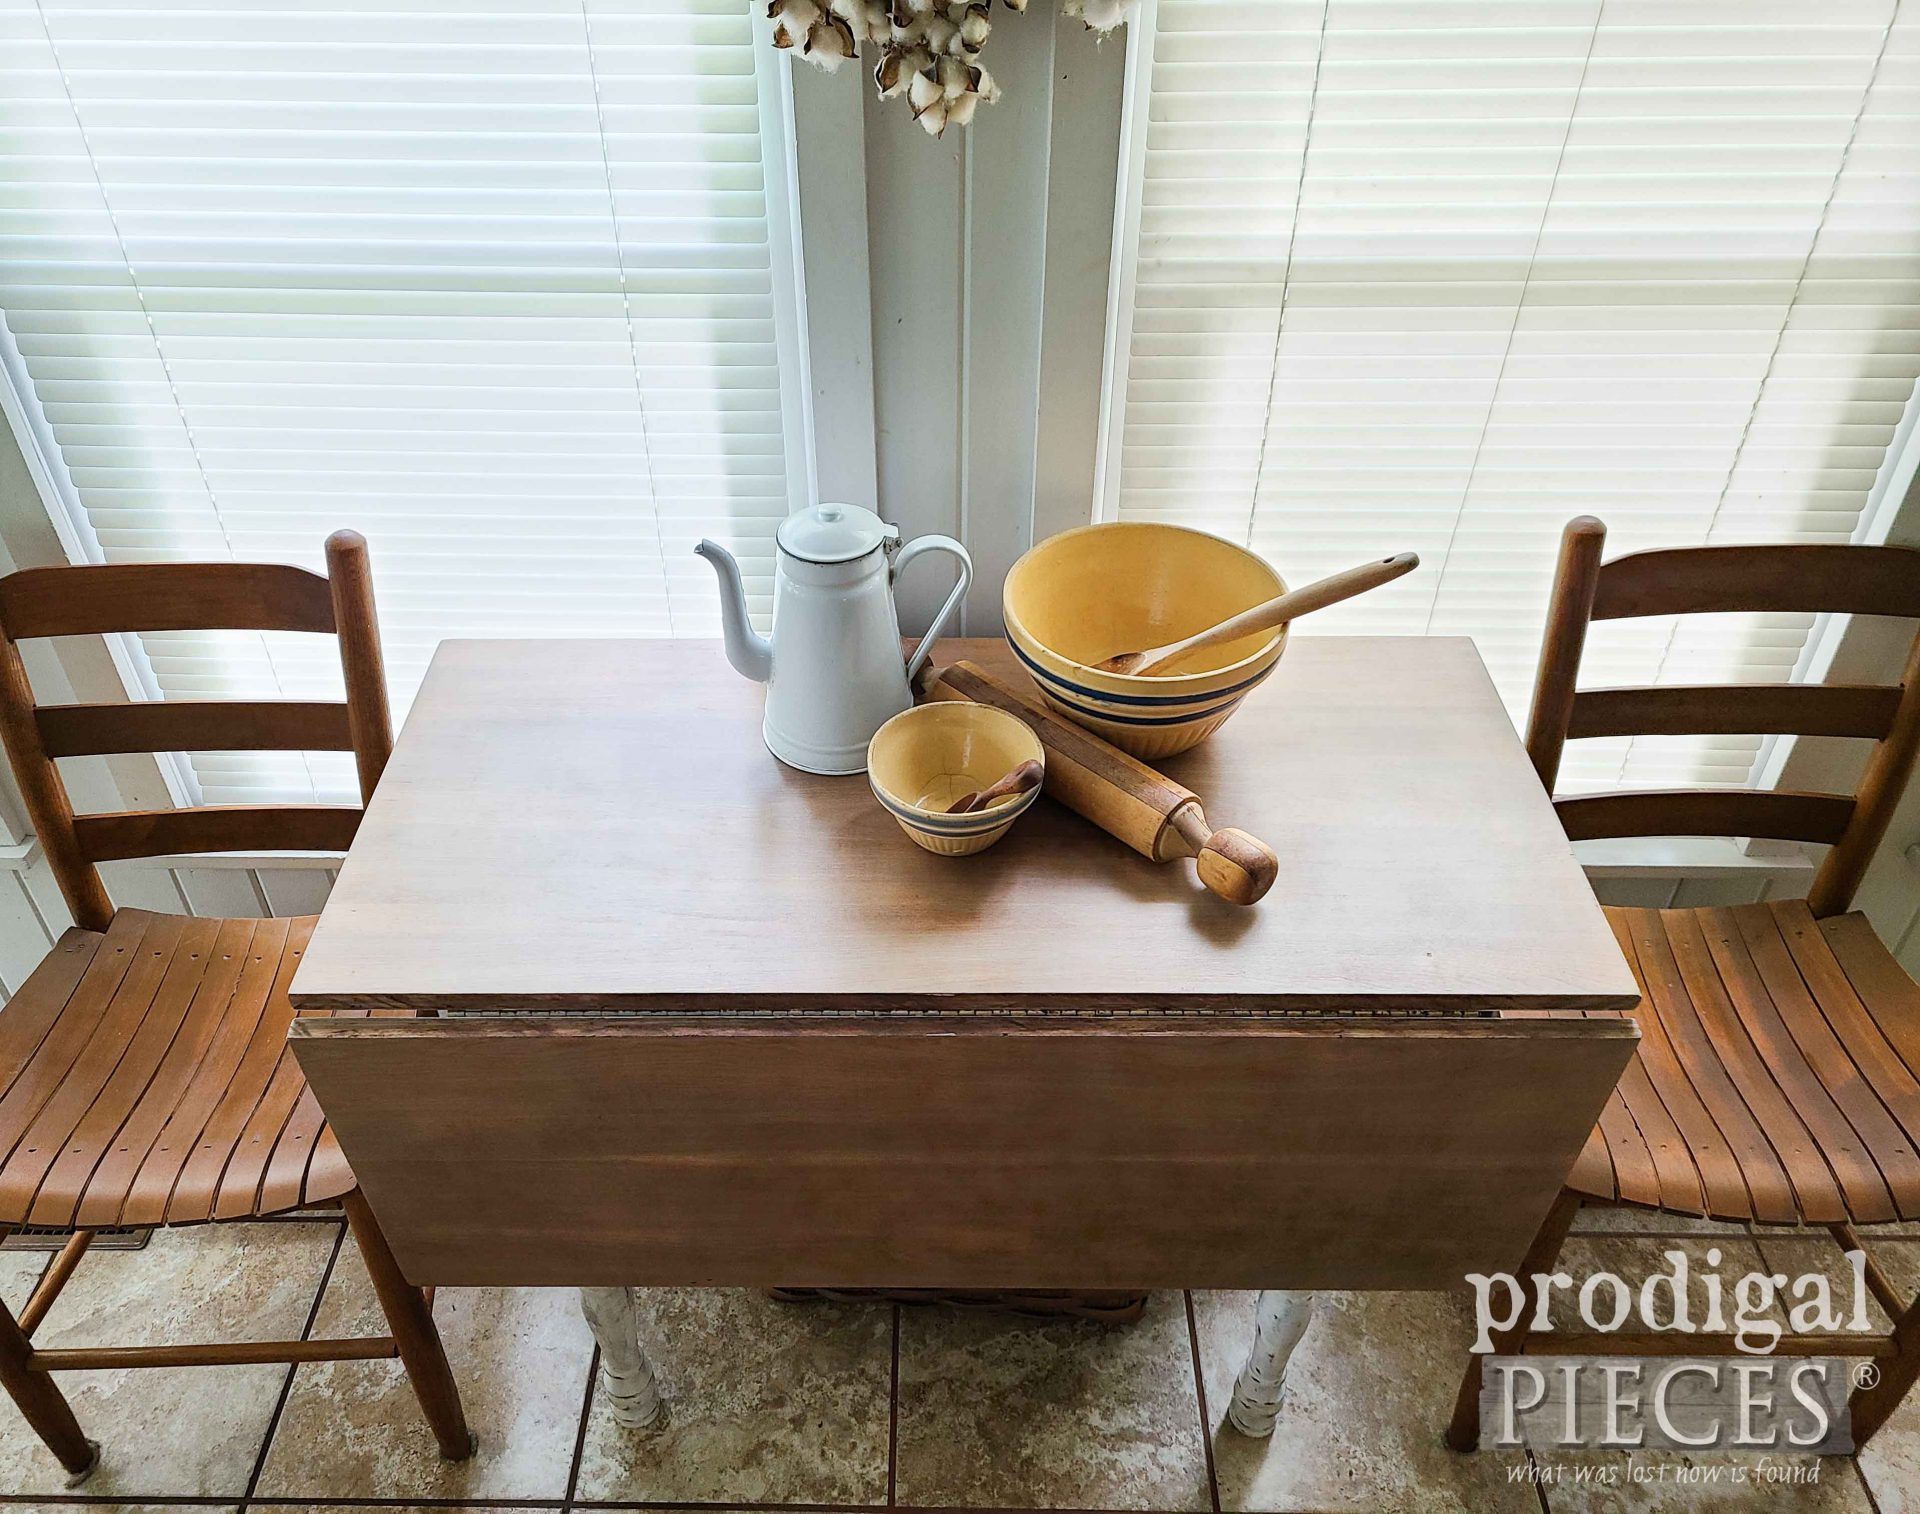 Weathered Wood Vintage Drop-Leaf Dining Table Top by Larissa of Prodigal Pieces | prodigalpieces.com #prodigalpieces #vintage #furniture